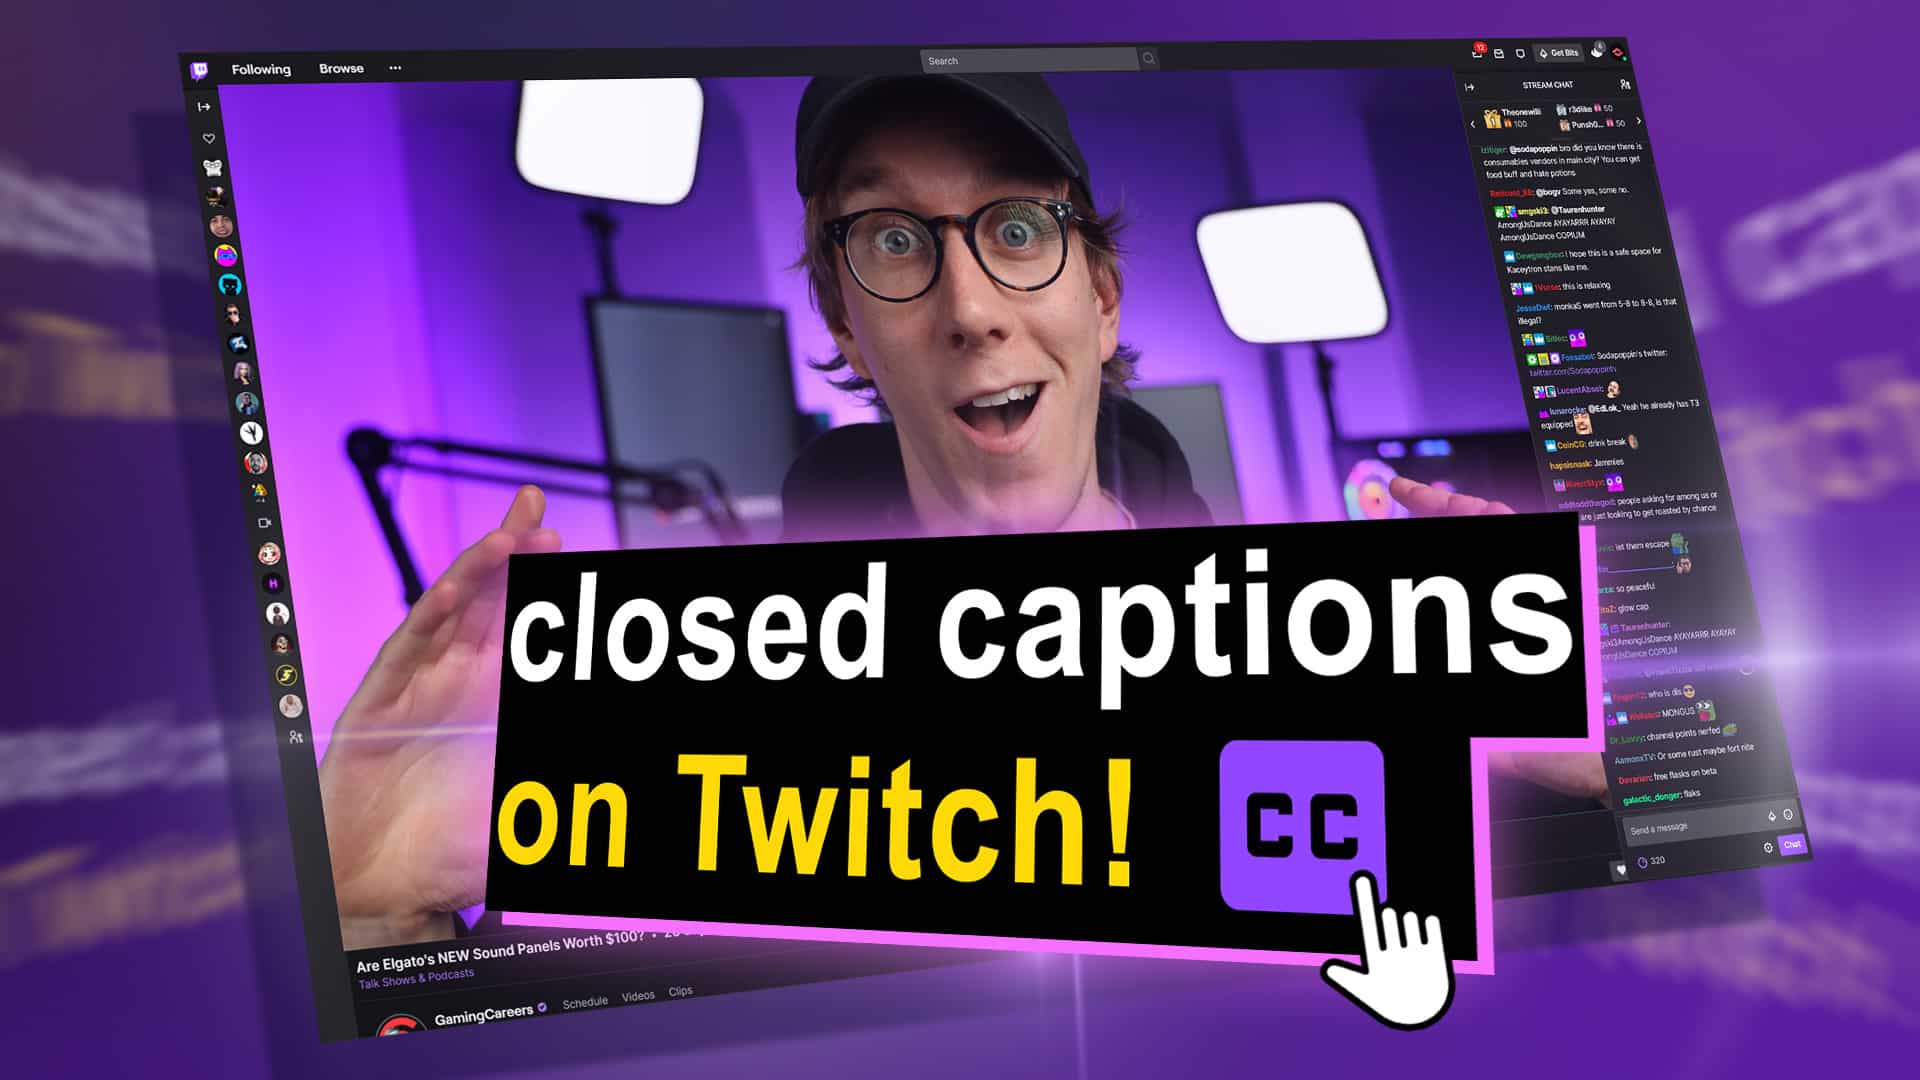 Maximize Your Reach on Twitch with Live Captions